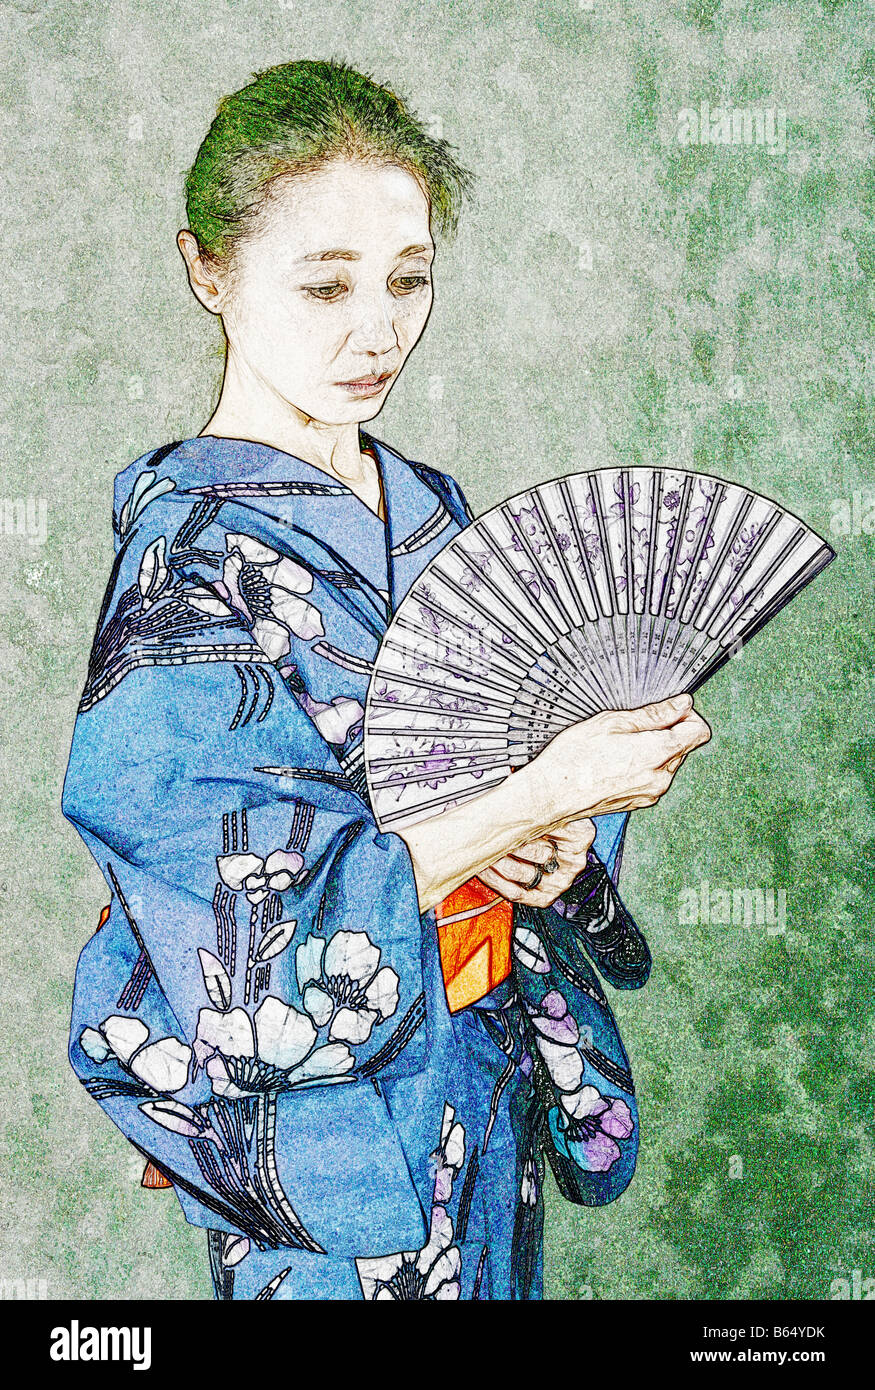 Illustration of a Japanese Woman in a Kimono with a Fan. Digital Derivation from an Original Photograph. Stock Photo